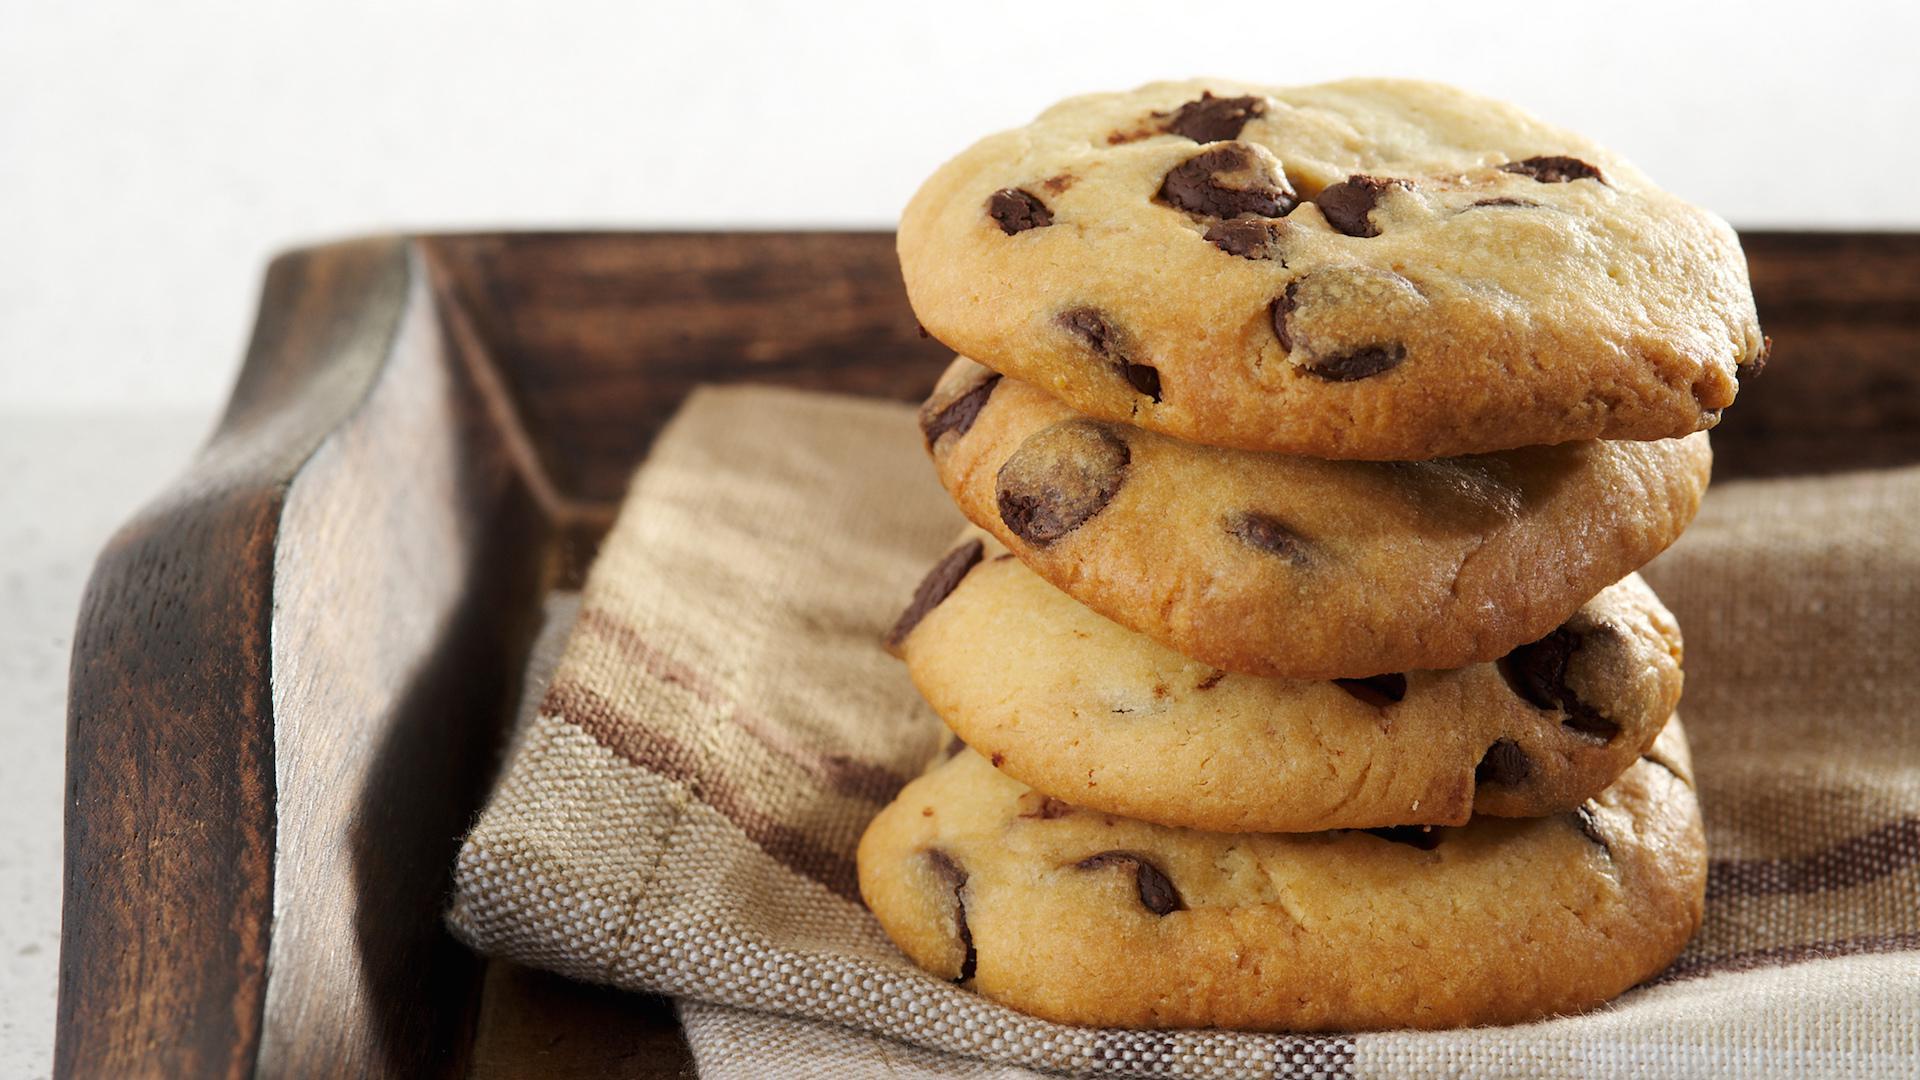 5 Ingredient, 25 Minute Chocolate Chip Cookies Are Insanely Easy (VIDEO)